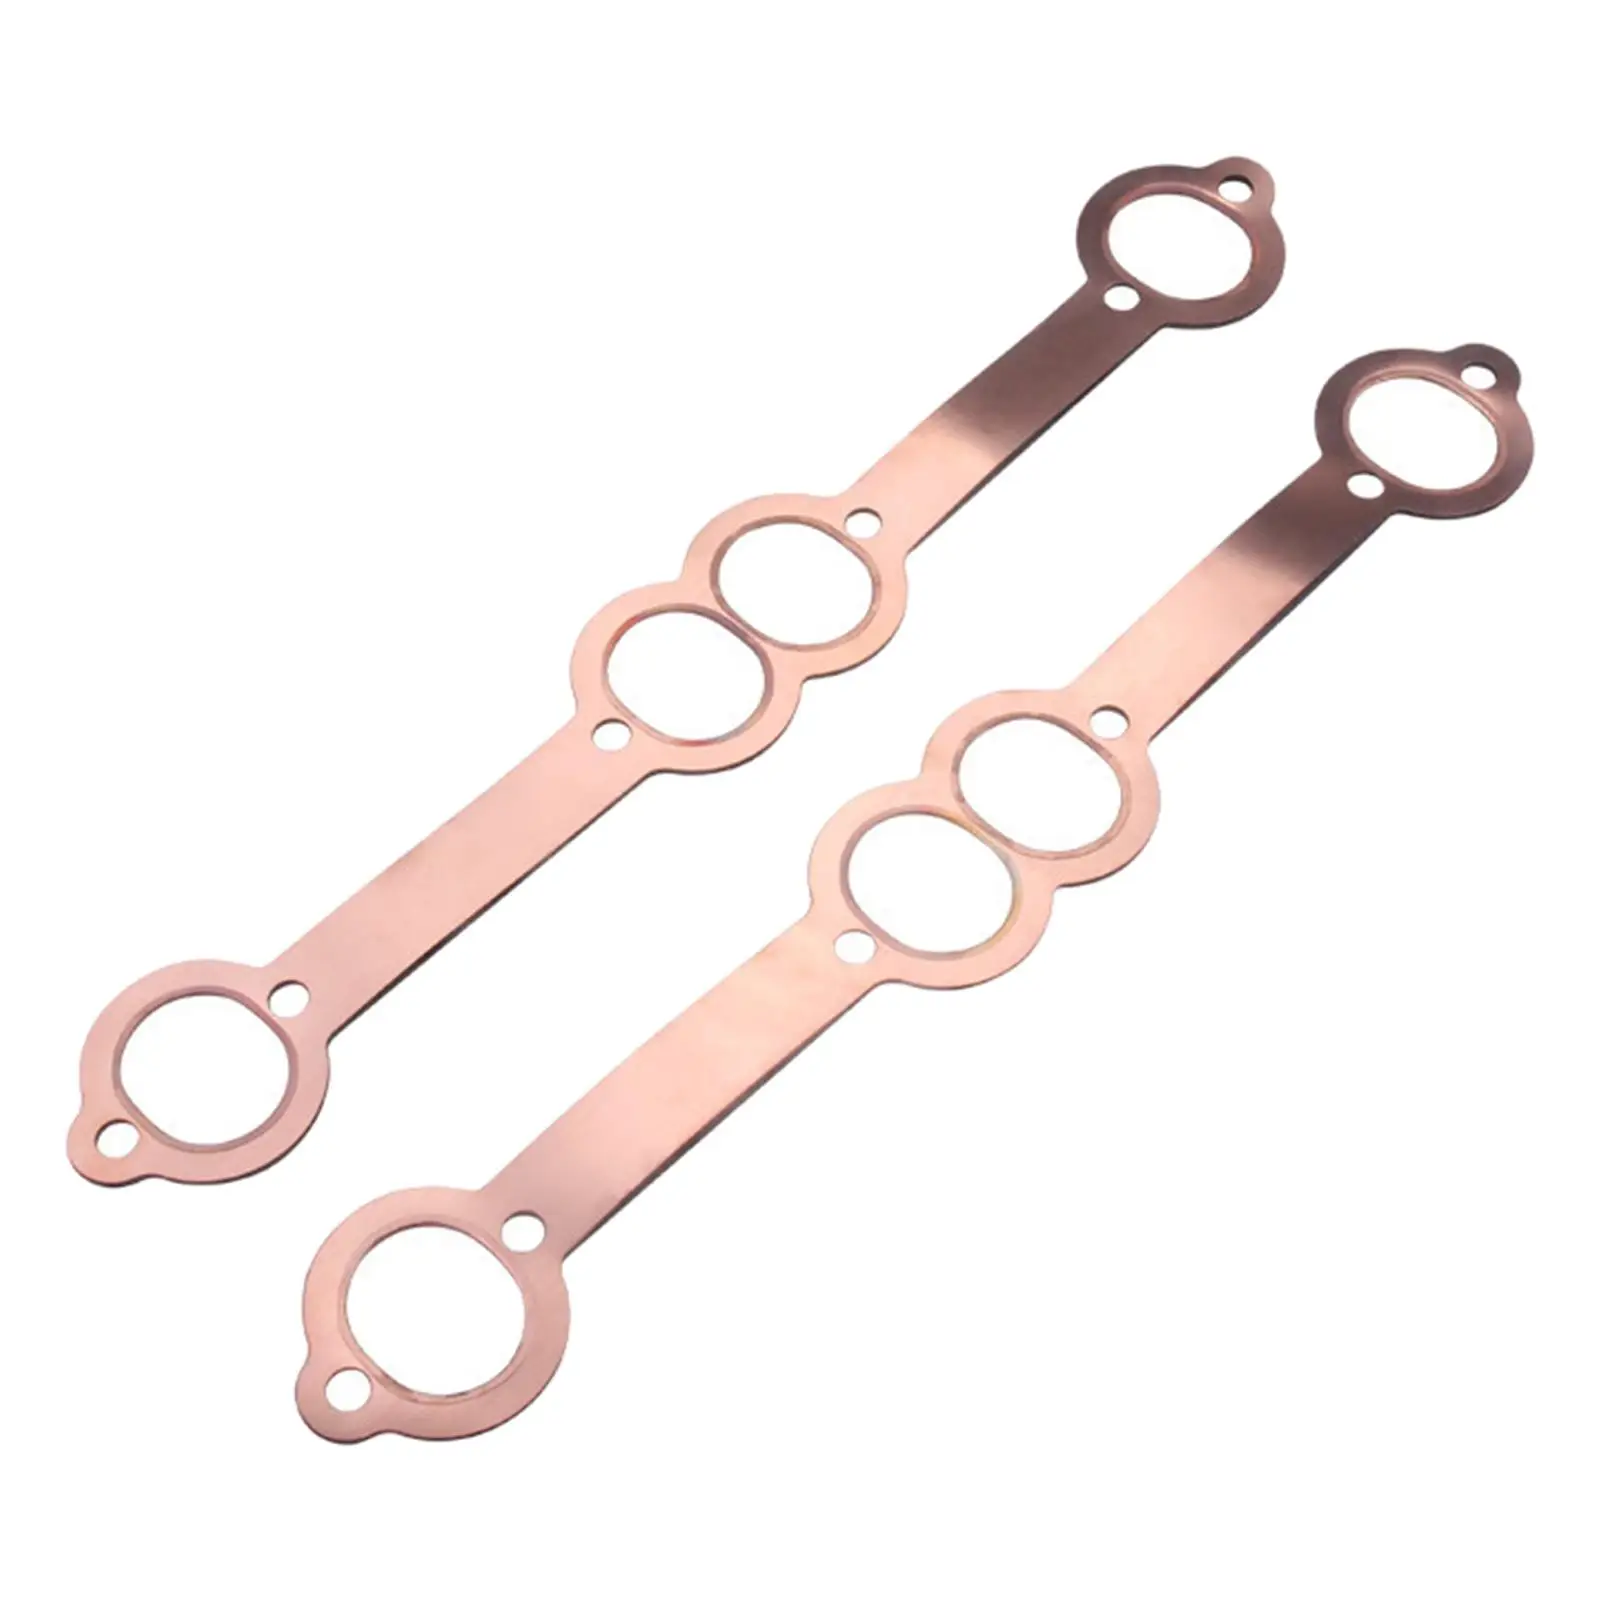 2 Pieces Auto Copper Header Exhaust Gaskets for SB 350 383 400